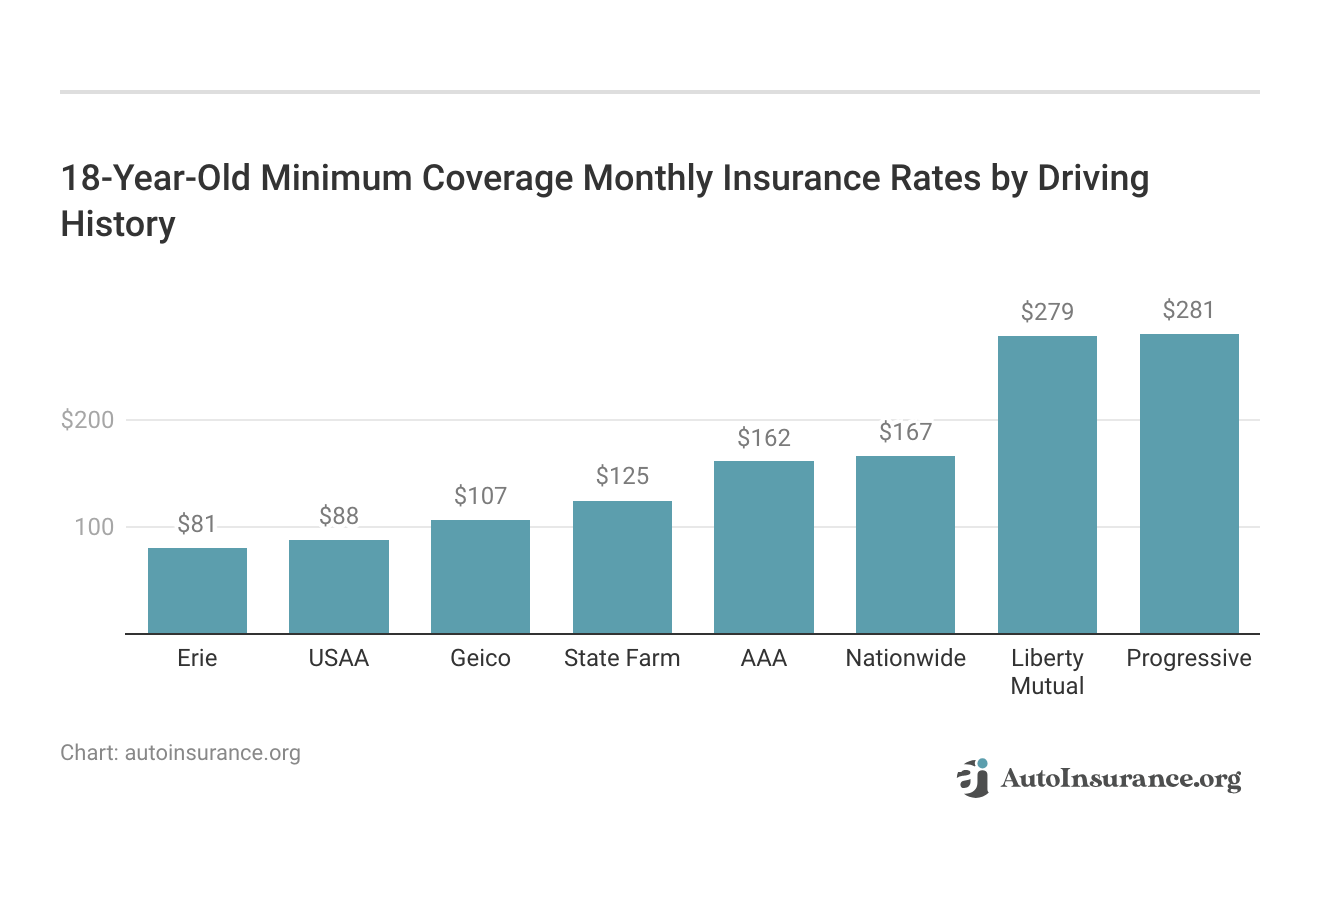 <h3>18-Year-Old Minimum Coverage Monthly Insurance Rates by Driving History</h3>